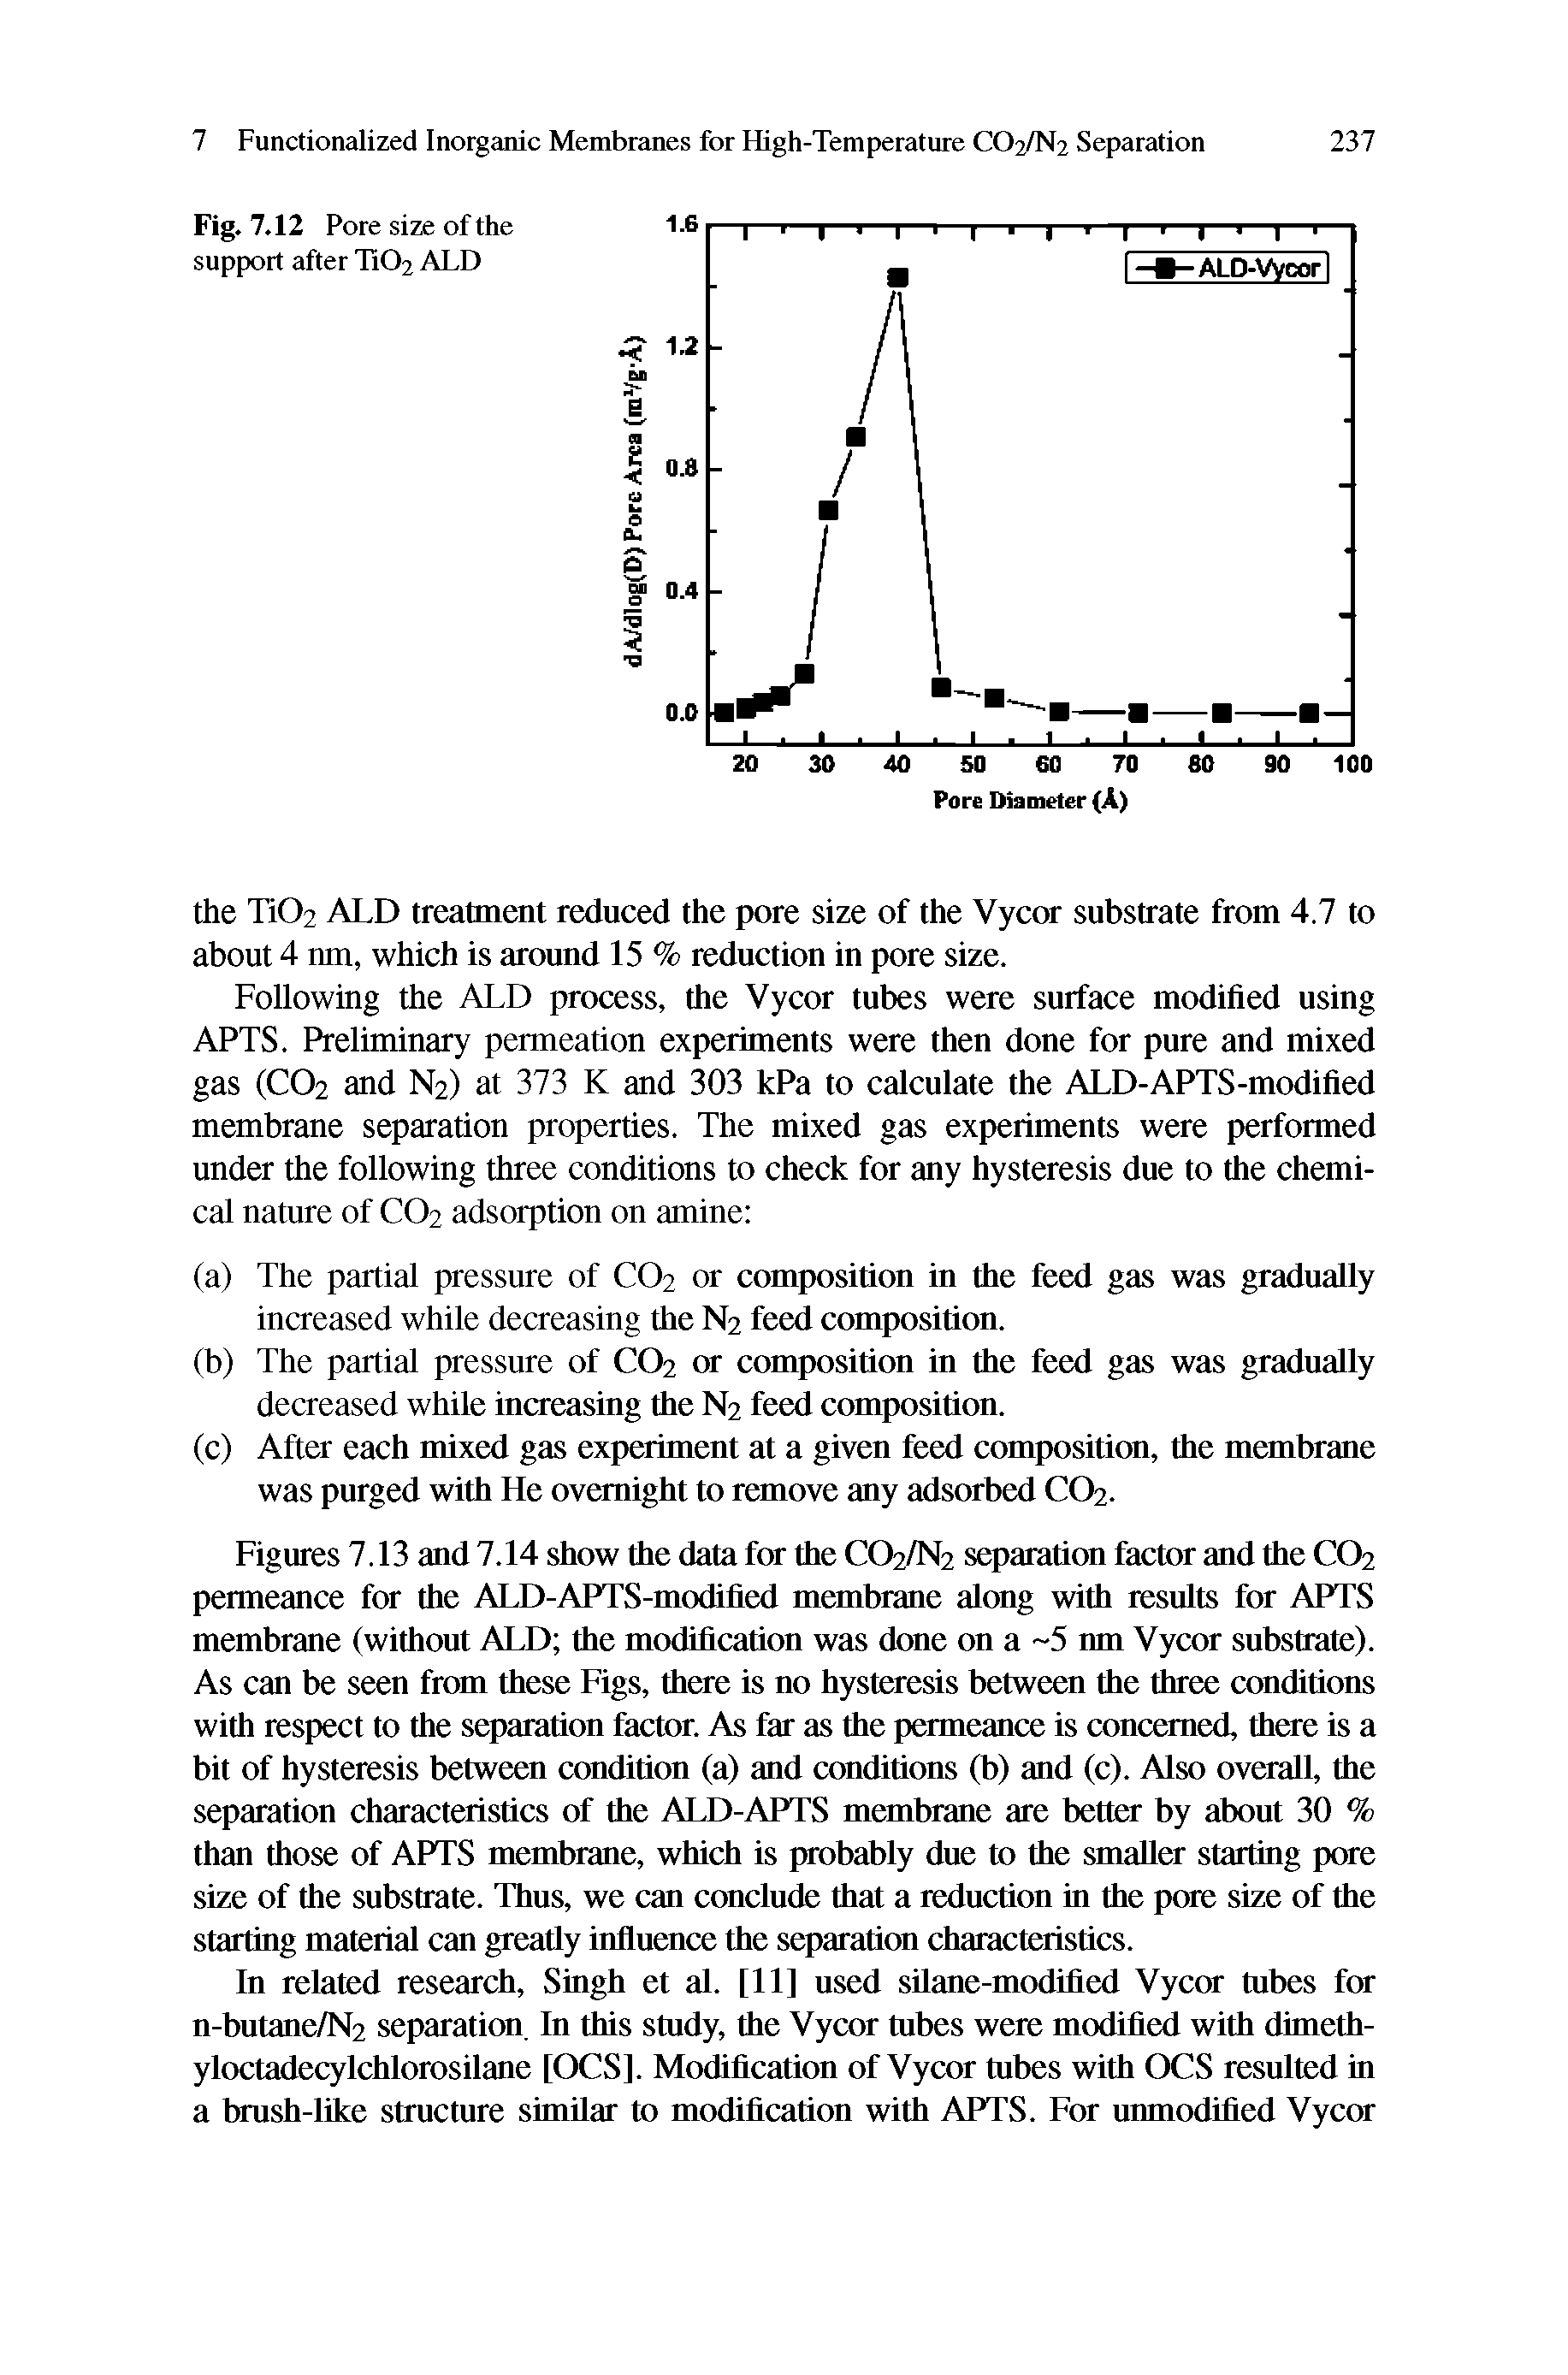 Figures 7.13 and 7.14 show the data for the CO2/N2 separation factor and the CO2 permeance for the ALD-APTS-modified manbrane along with results for APTS membrane (without ALD the modification was done on a 5 nm Vycor substrate). As can be seen from these Figs, there is no hysteresis between the three conditions with respect to the separation factor. As far as the permeance is concerned, there is a bit of hysteresis between condition (a) and conditions (b) and (c). Also overaU, the separation characteristics of the ALD-APTS manbrane are better by about 30 % than those of APTS membrane, which is probably due to the smaller starting pore size of the substrate. Thus, we can conclude that a reduction in the pore size of the starting material can gready influence the separation characteristics.